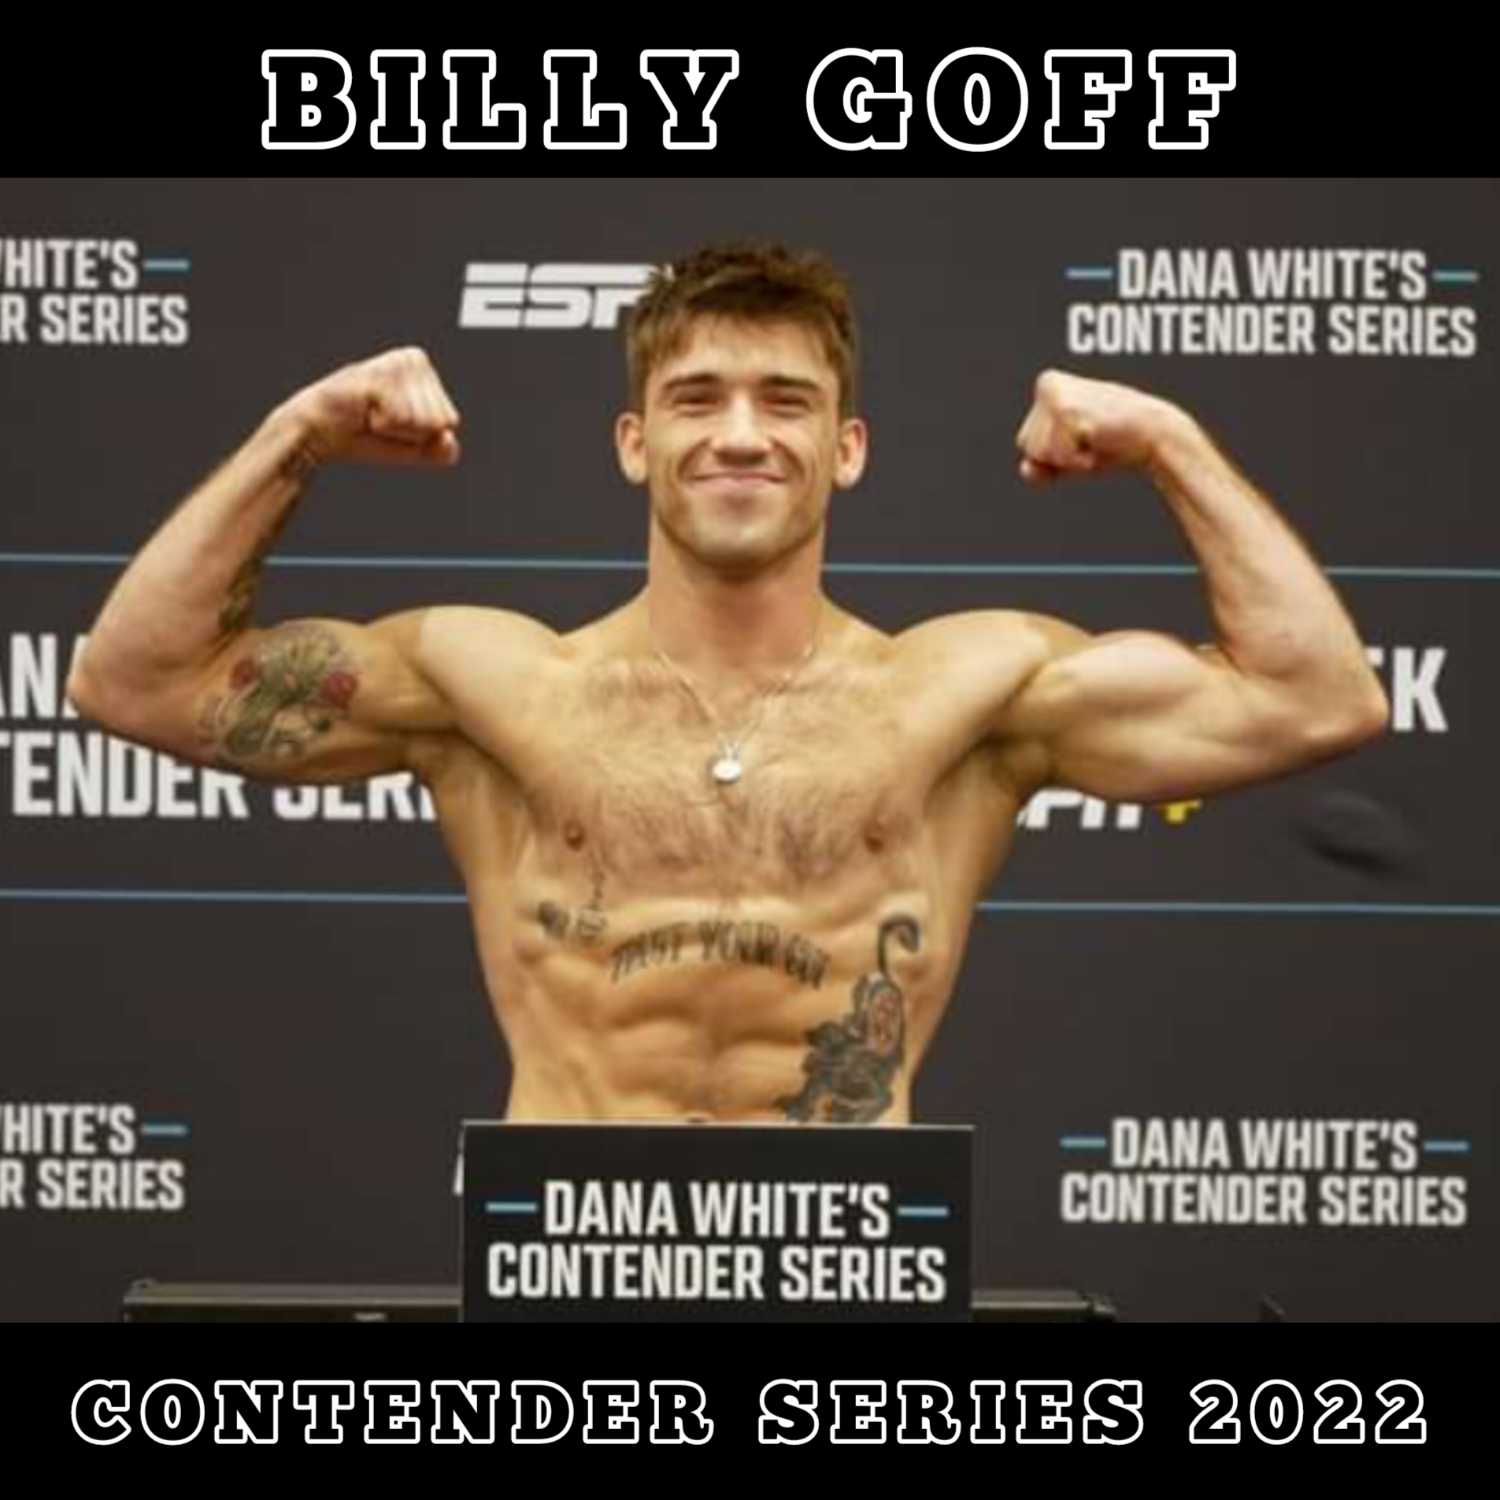 Billy Goff (8-2) Recaps His 2022 Contender Series Victory & UFC Contract Win